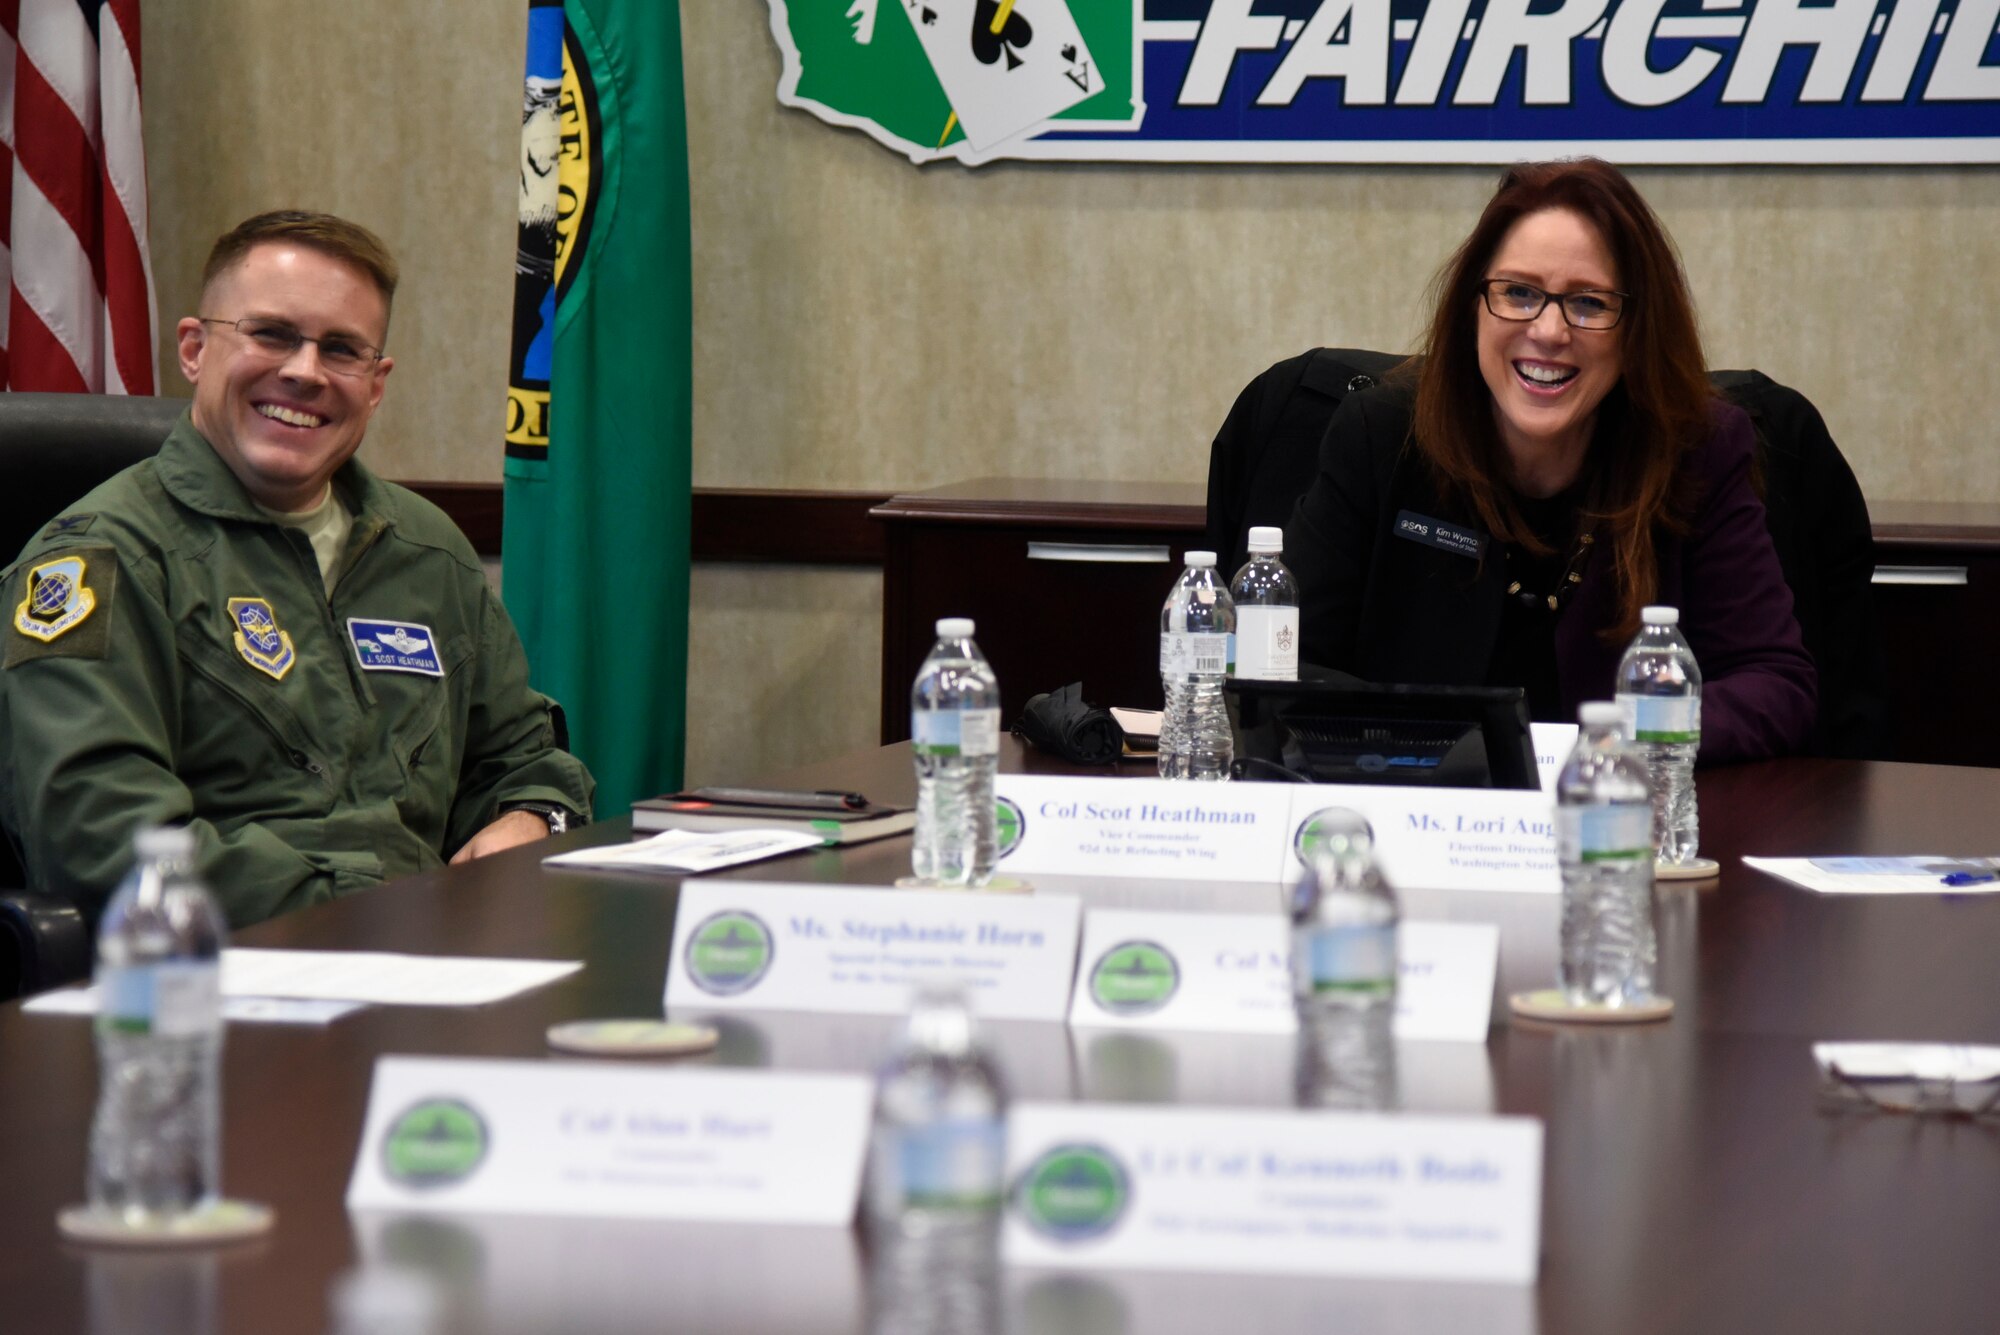 Colonel Scot Heathman, 92nd Air Refueling Wing vice commander, gives a mission brief to Kim Wyman, Washington Secretary of State, during a base visit at Fairchild AFB, Washington, Nov. 15, 2017. Wyman spoke with base leadership about the importance of voting and received information about Fairchild’s voting program. For more information on voting, visit www.fairchild.af.mil.  (U.S. Air Force photo/Senior Airman Nick Daniello)